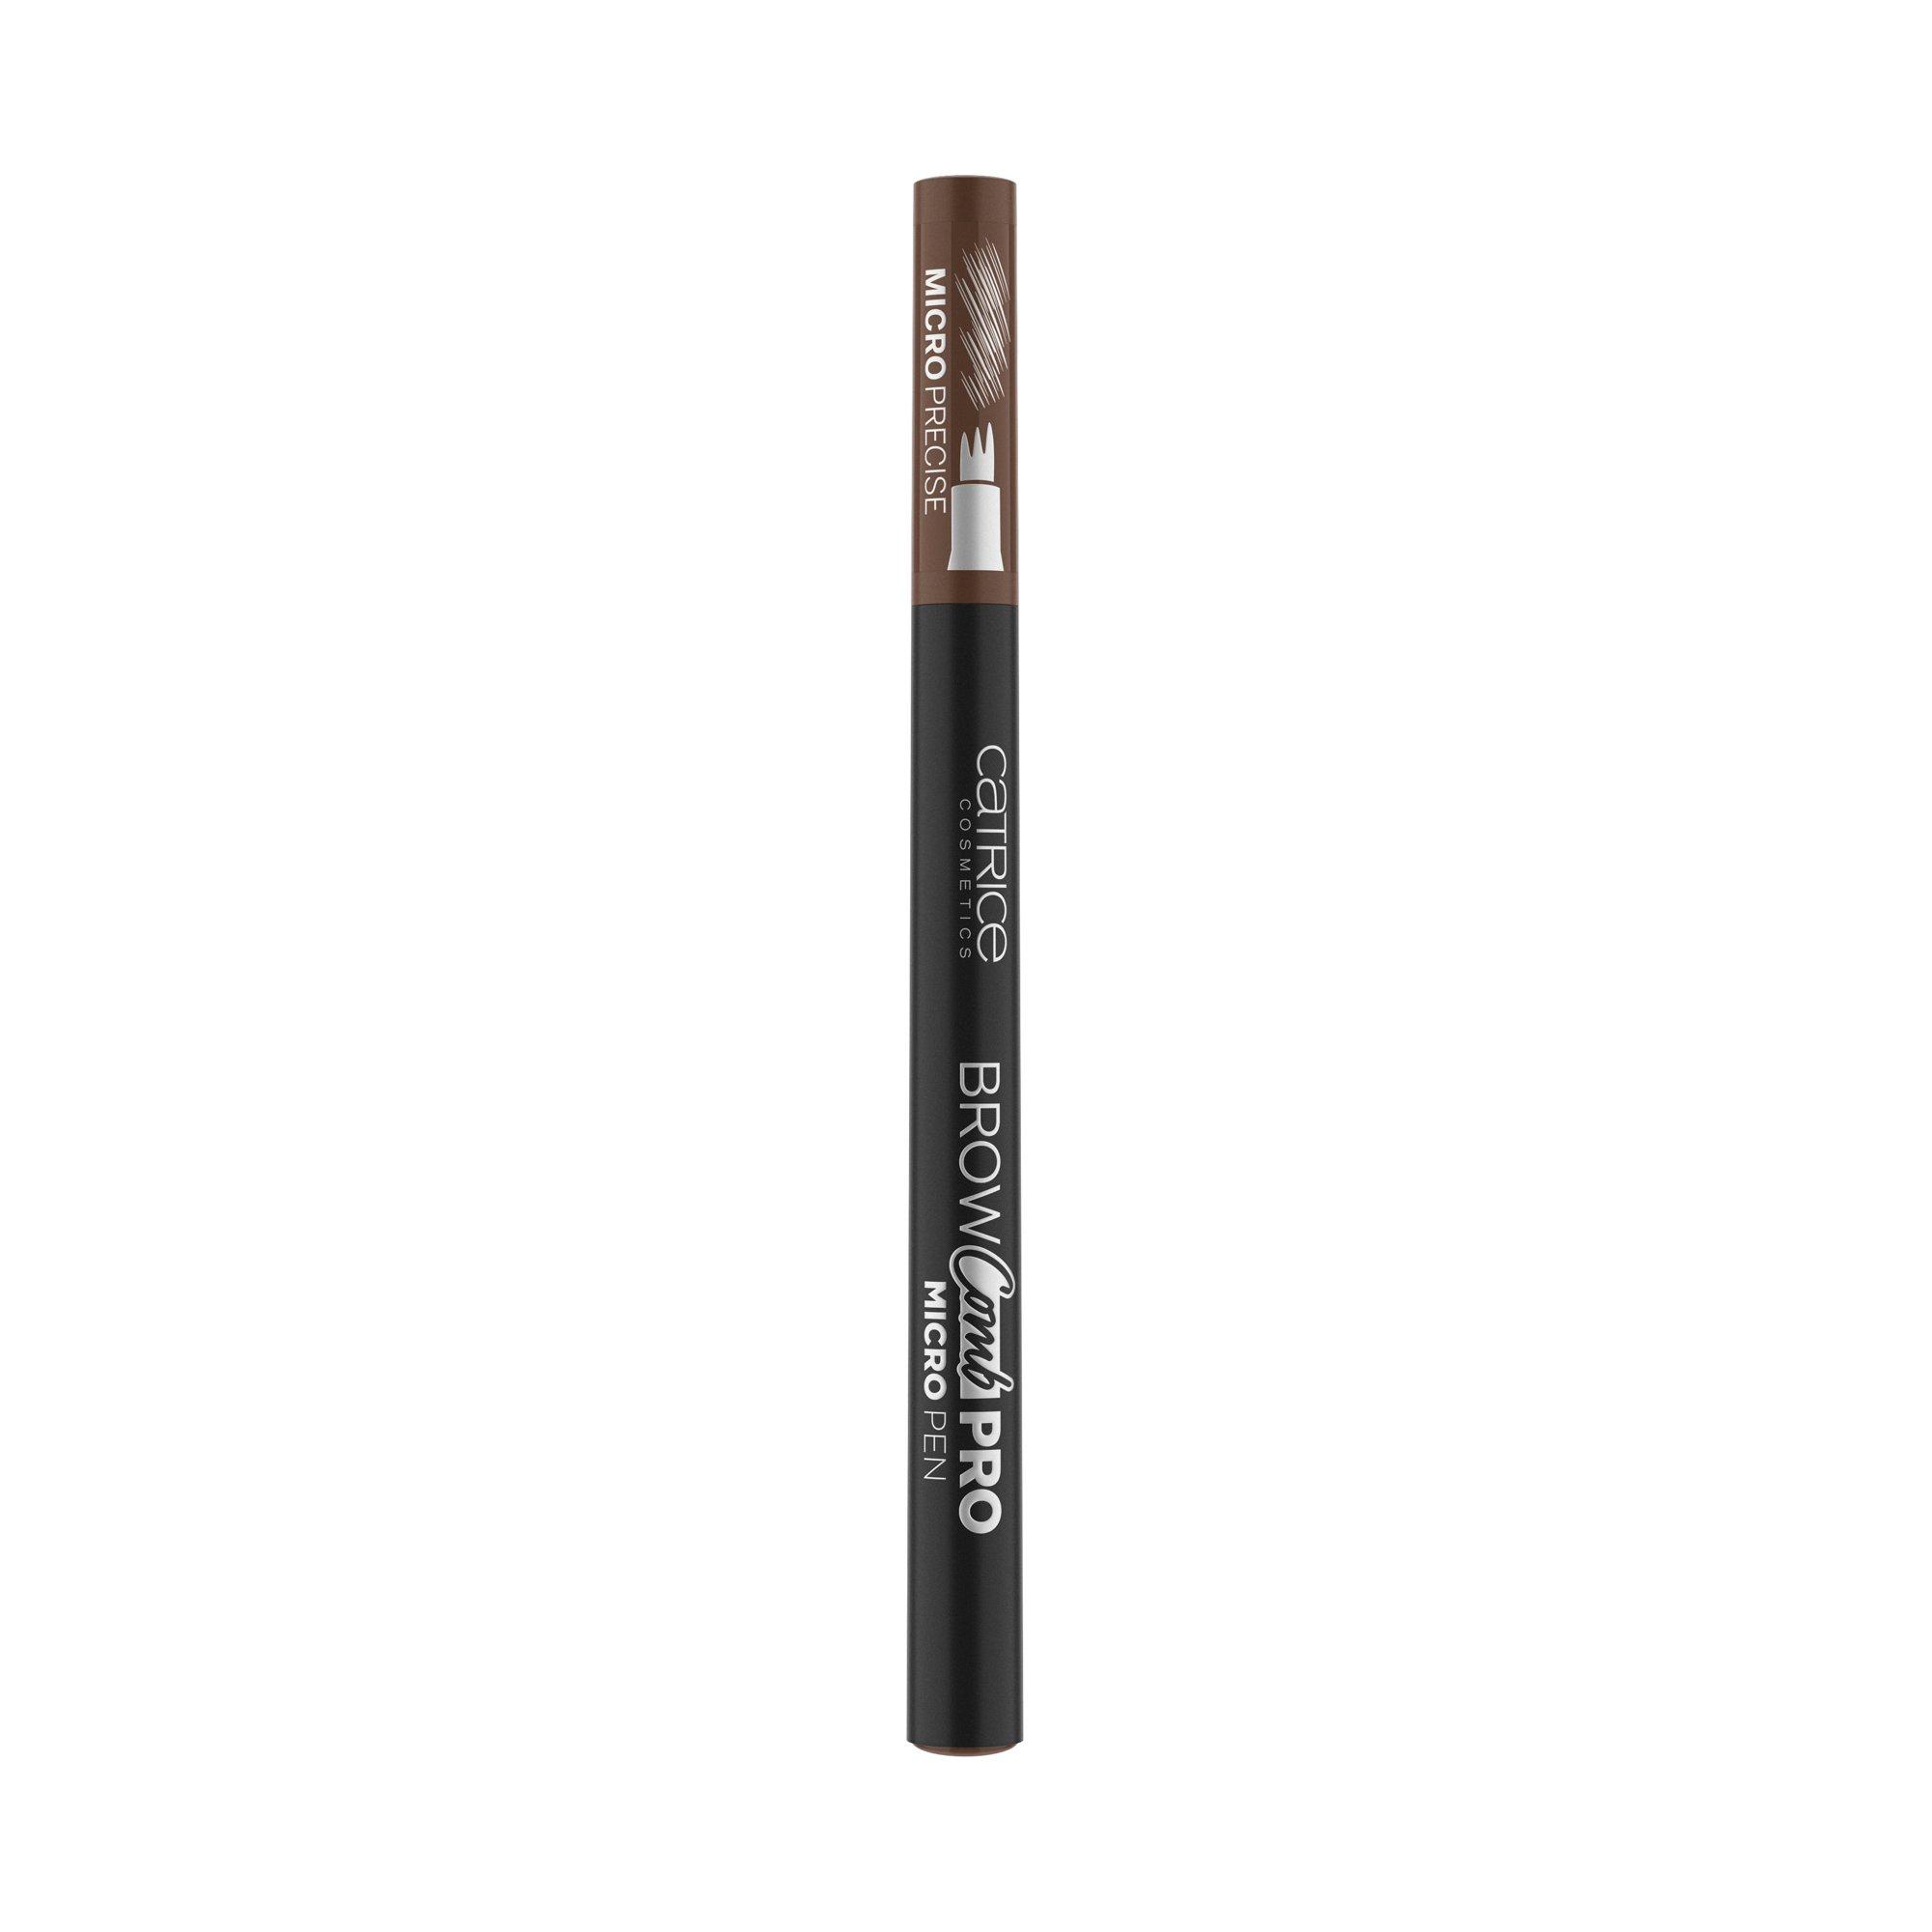 Image of CATRICE Brow Comb Pro Micro Augenbrauenstift - 1.1ML